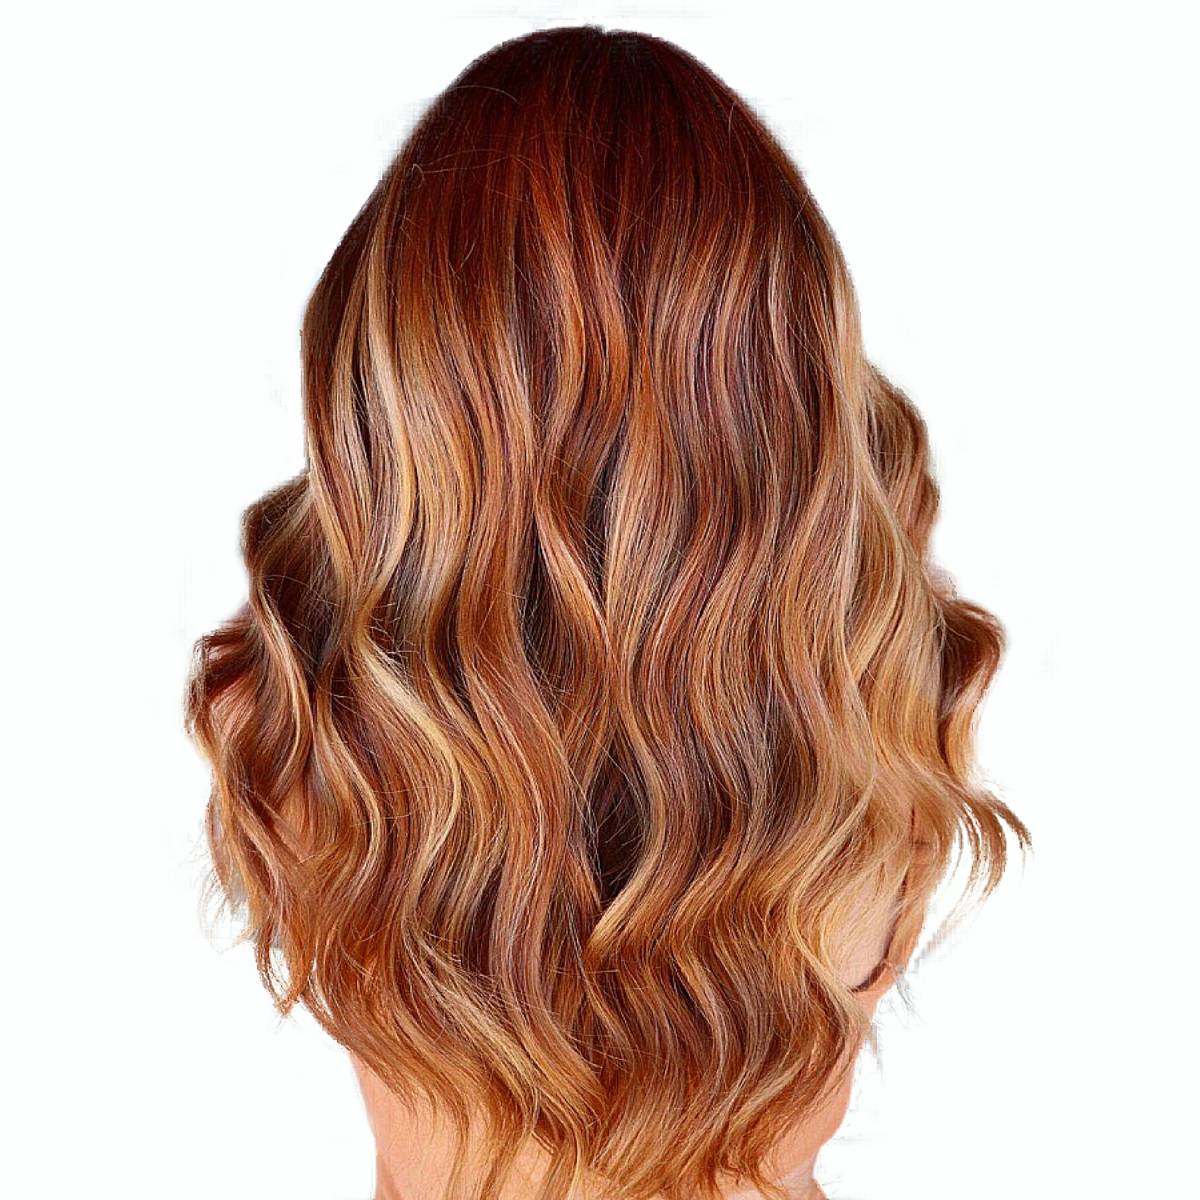 Reveal Your Fiery Nature with These 50 Red Ombre Hair Ideas